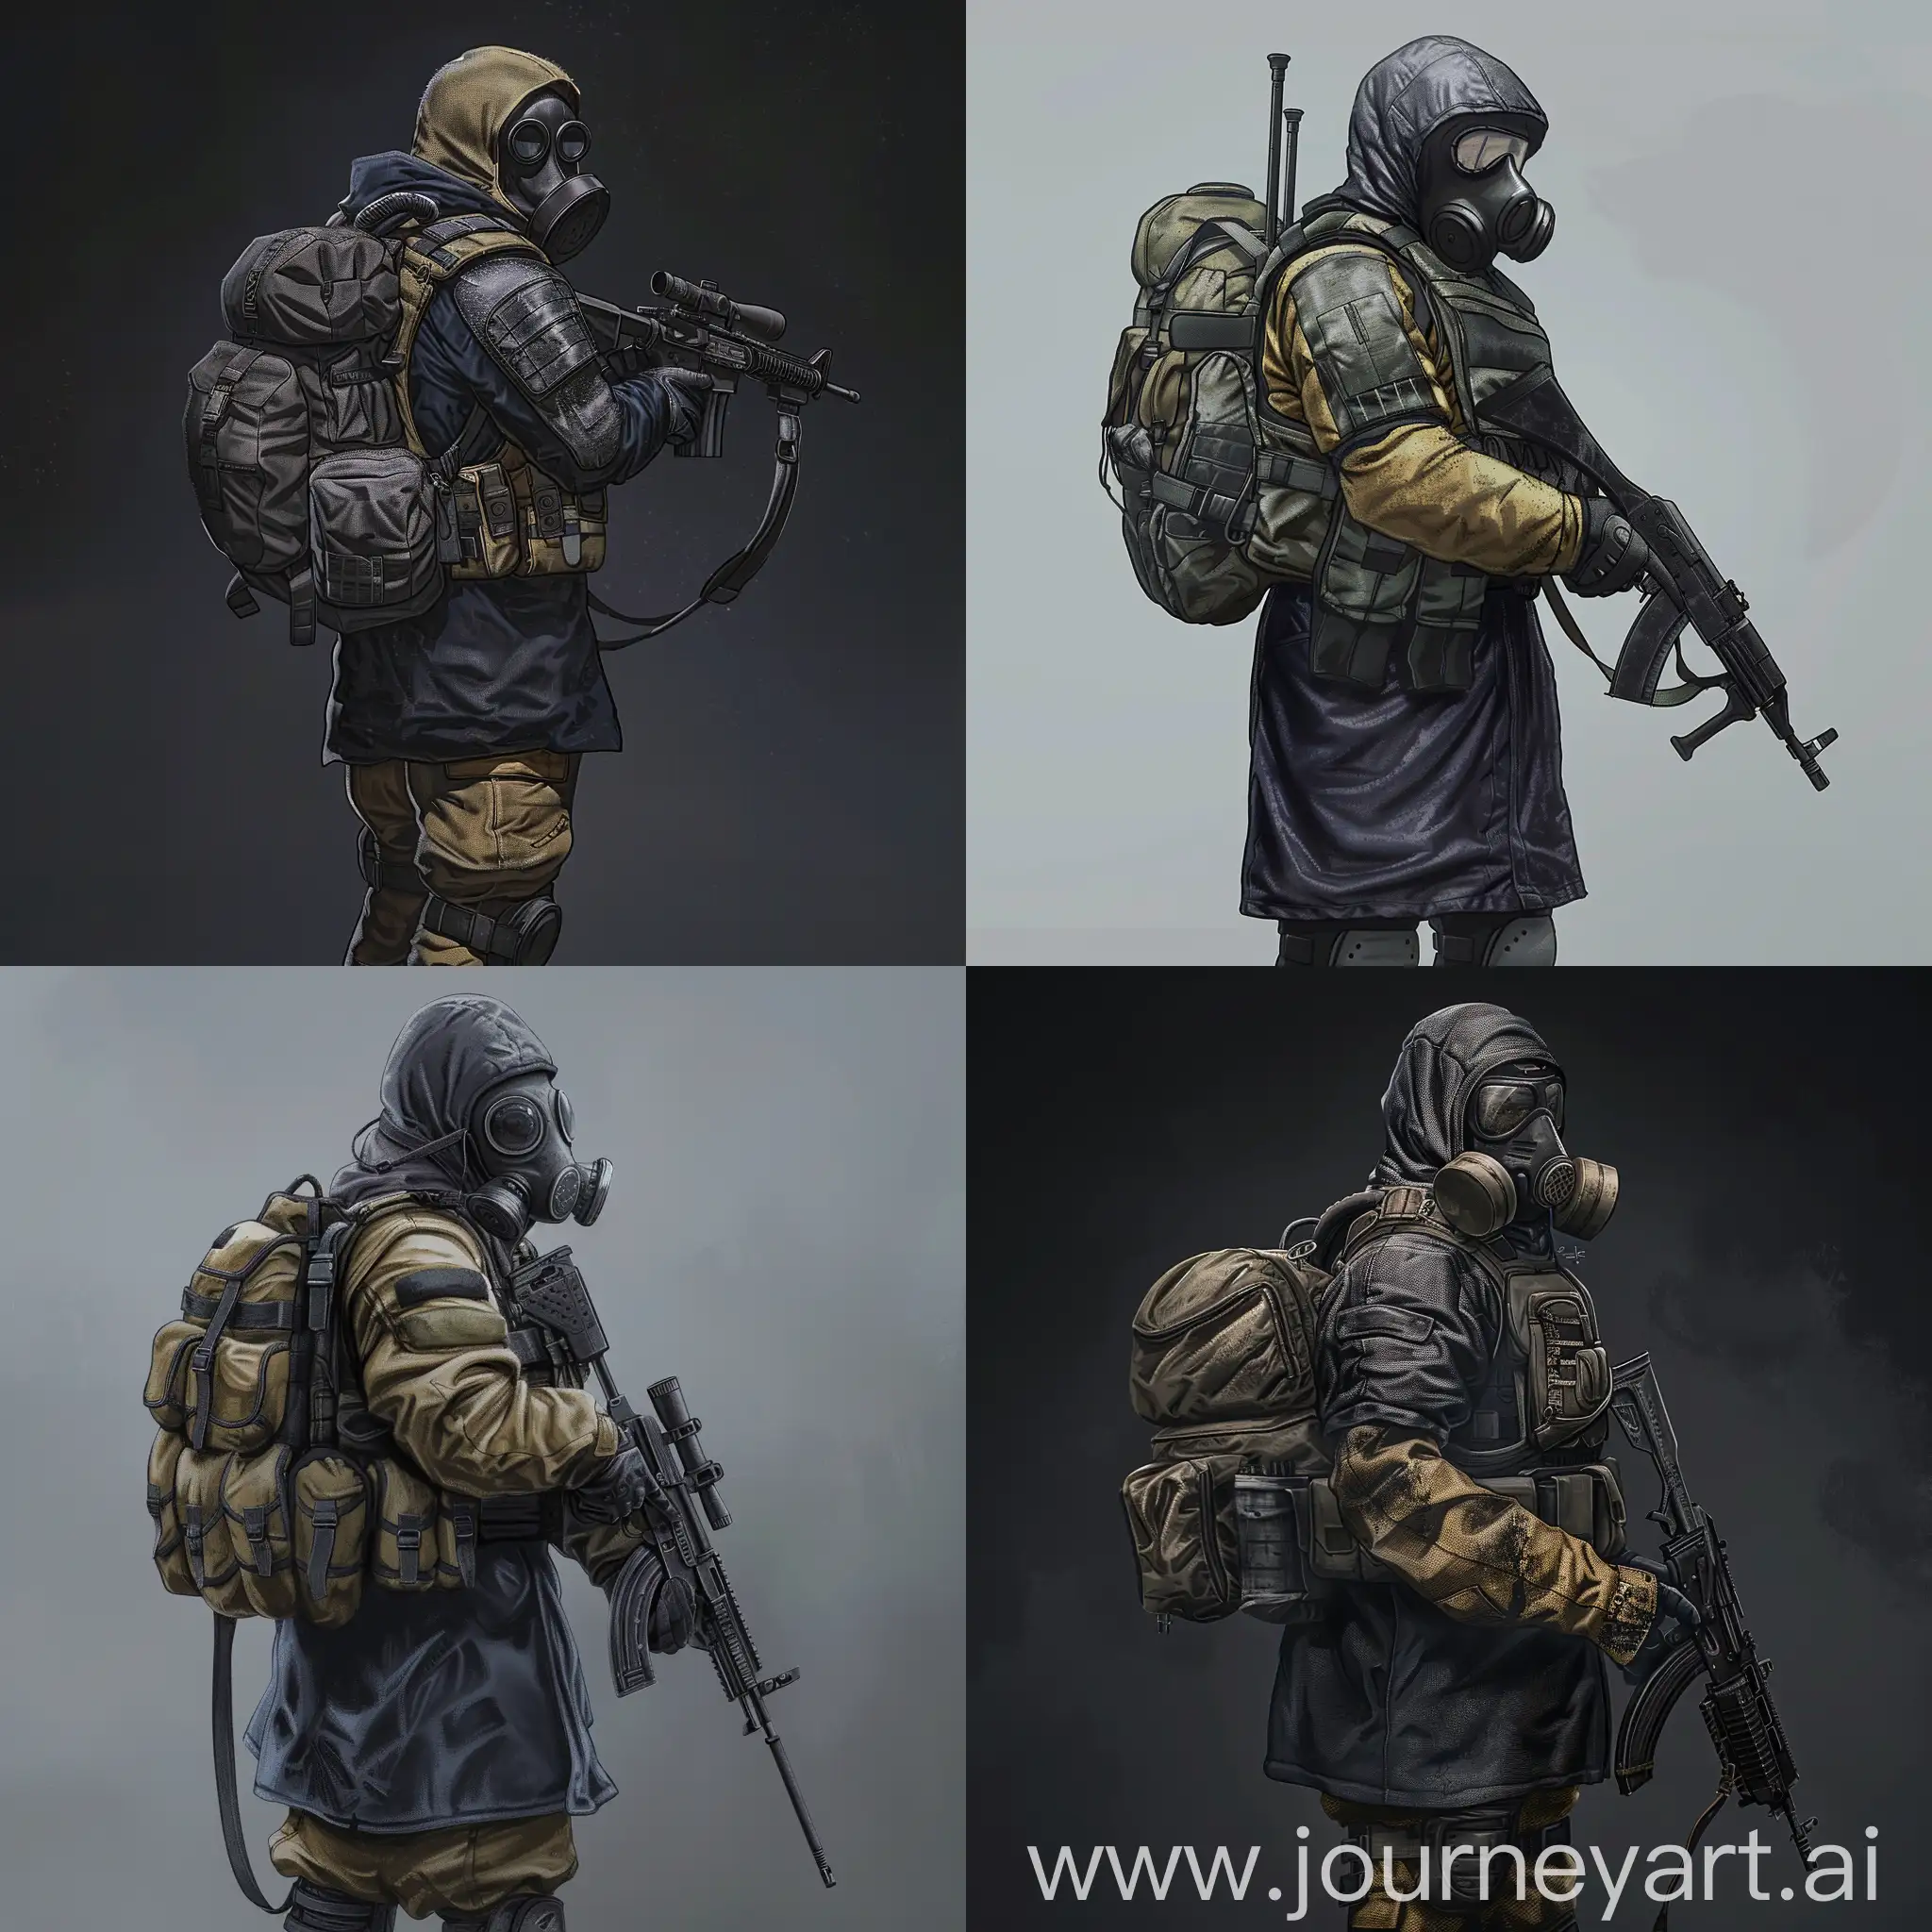 Digital design character mercenary from the universe of S.T.A.L.K.E.R., dressed in a dark blue military raincoat, gray military armor on his body, a gasmask on his face, a military backpack on his back, a rifle in his hands.